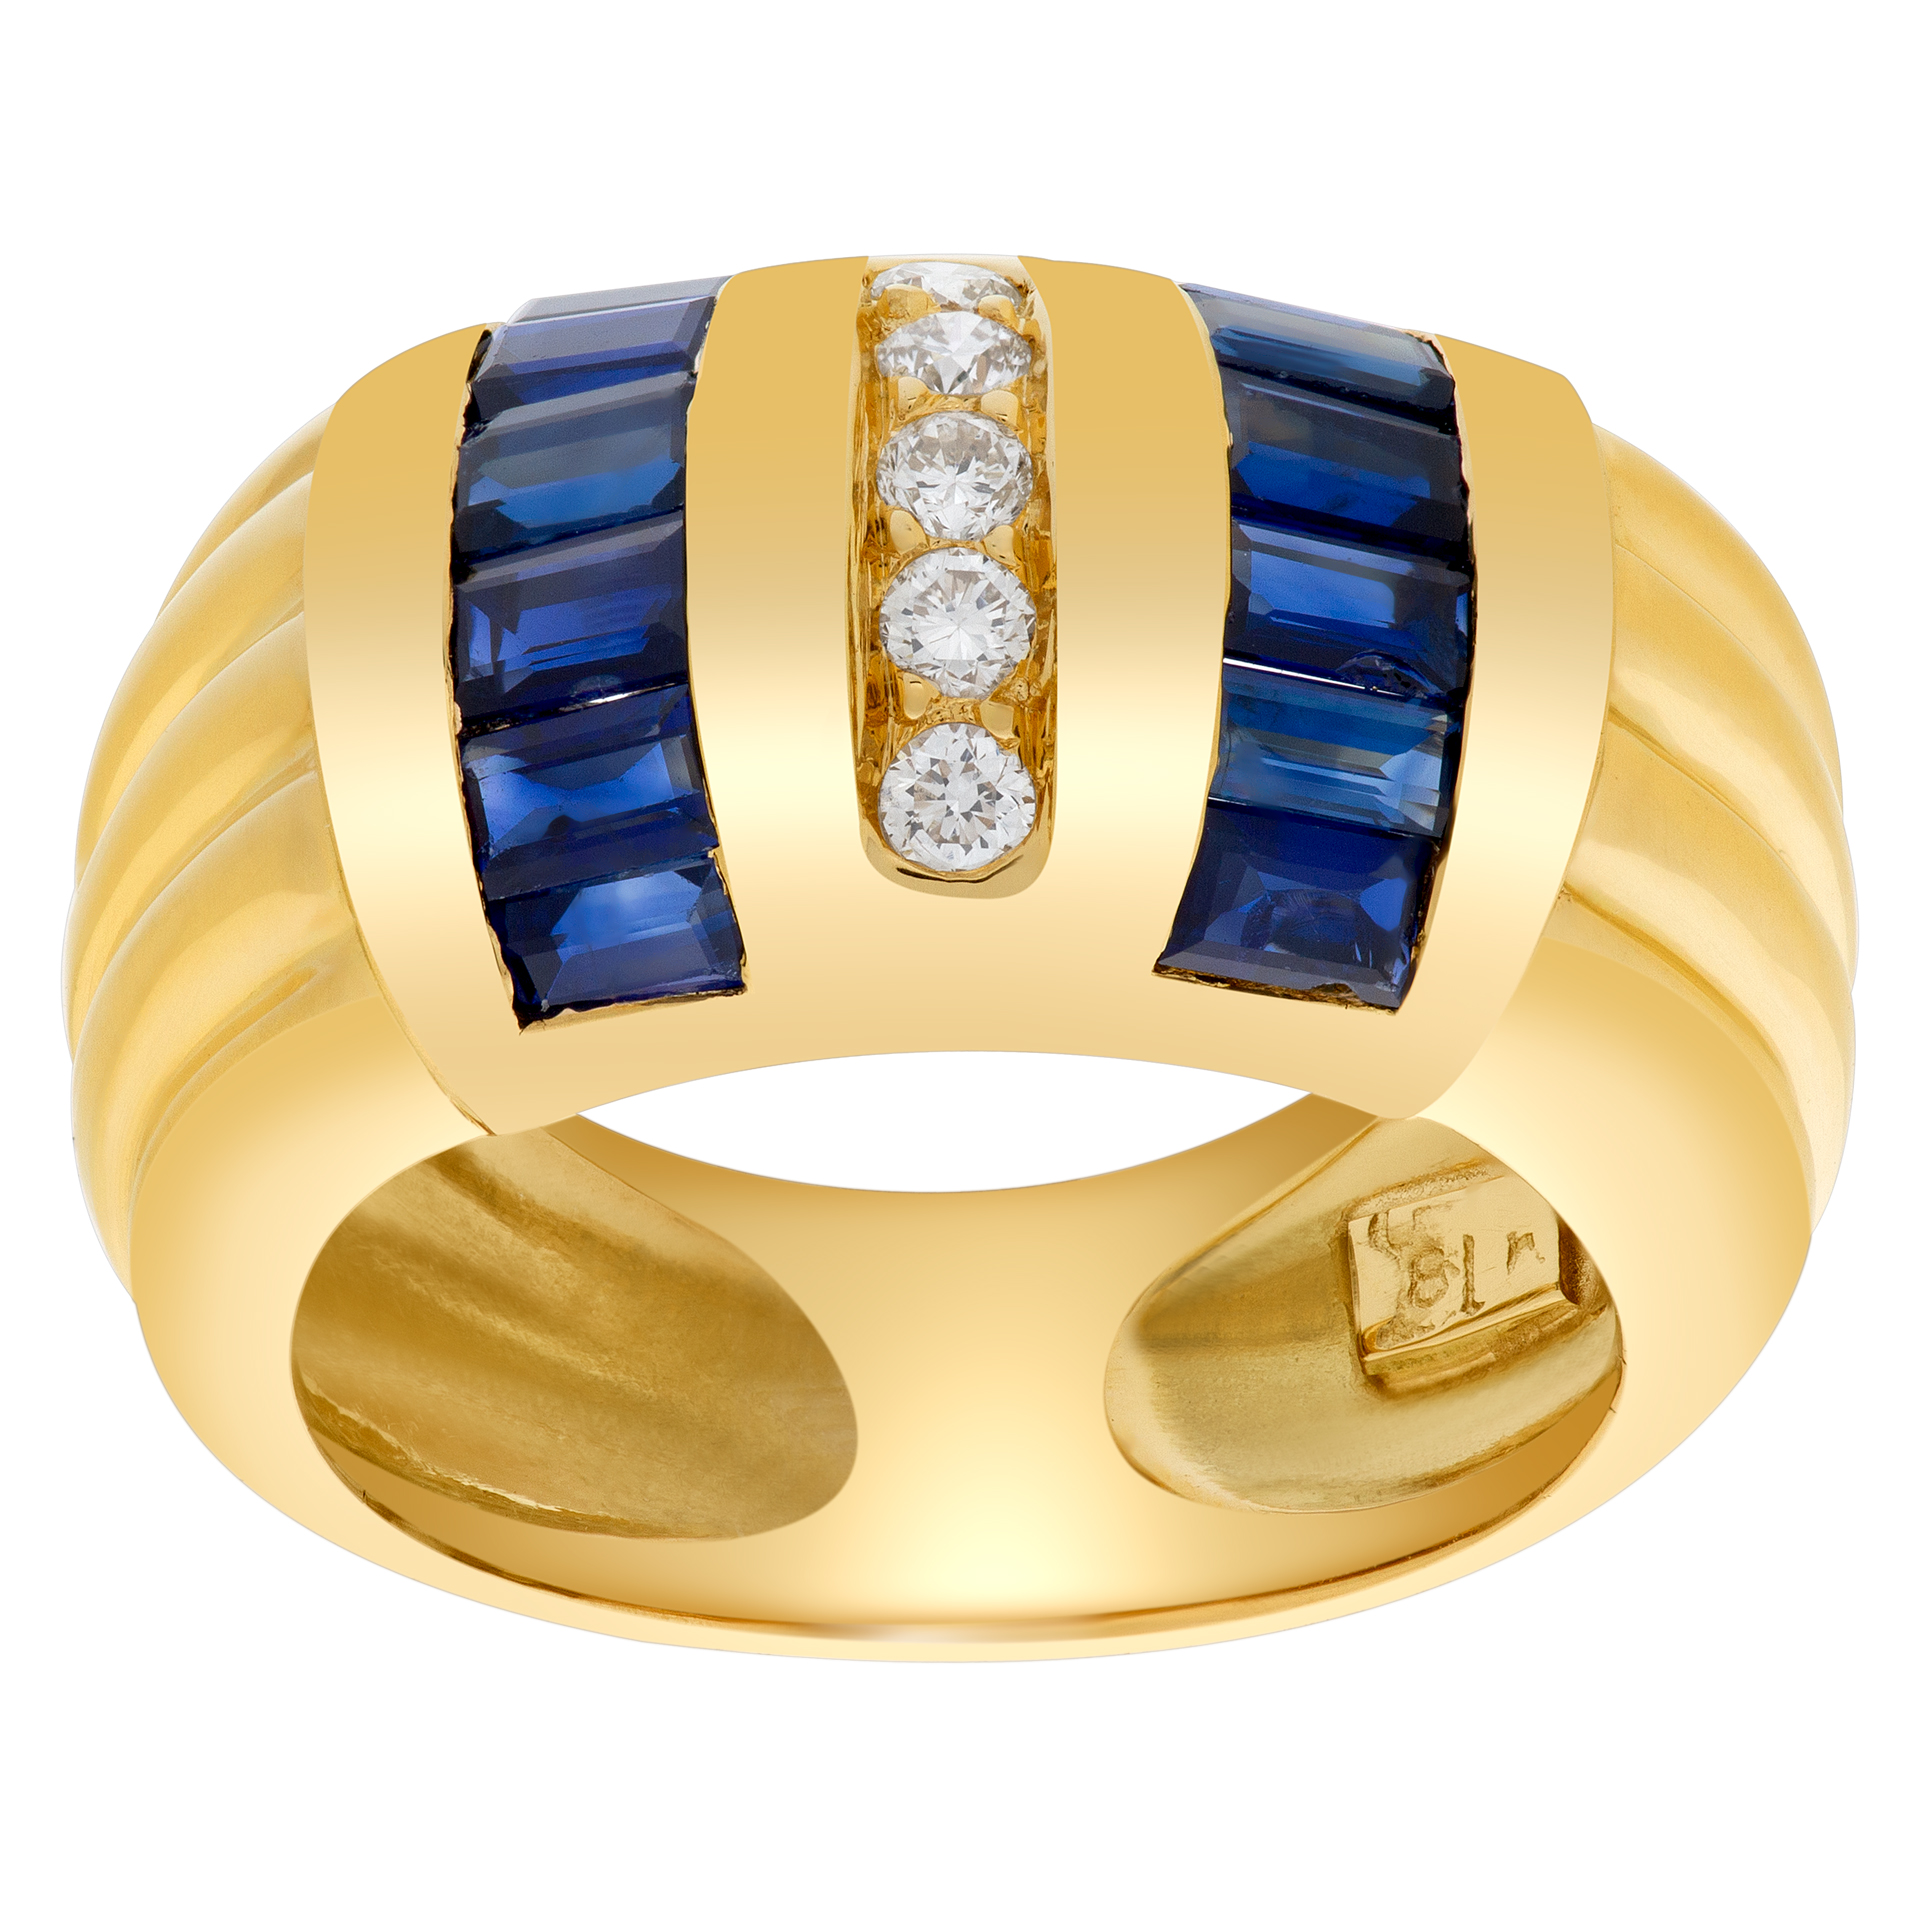 Sapphire and diamond ring in 18k